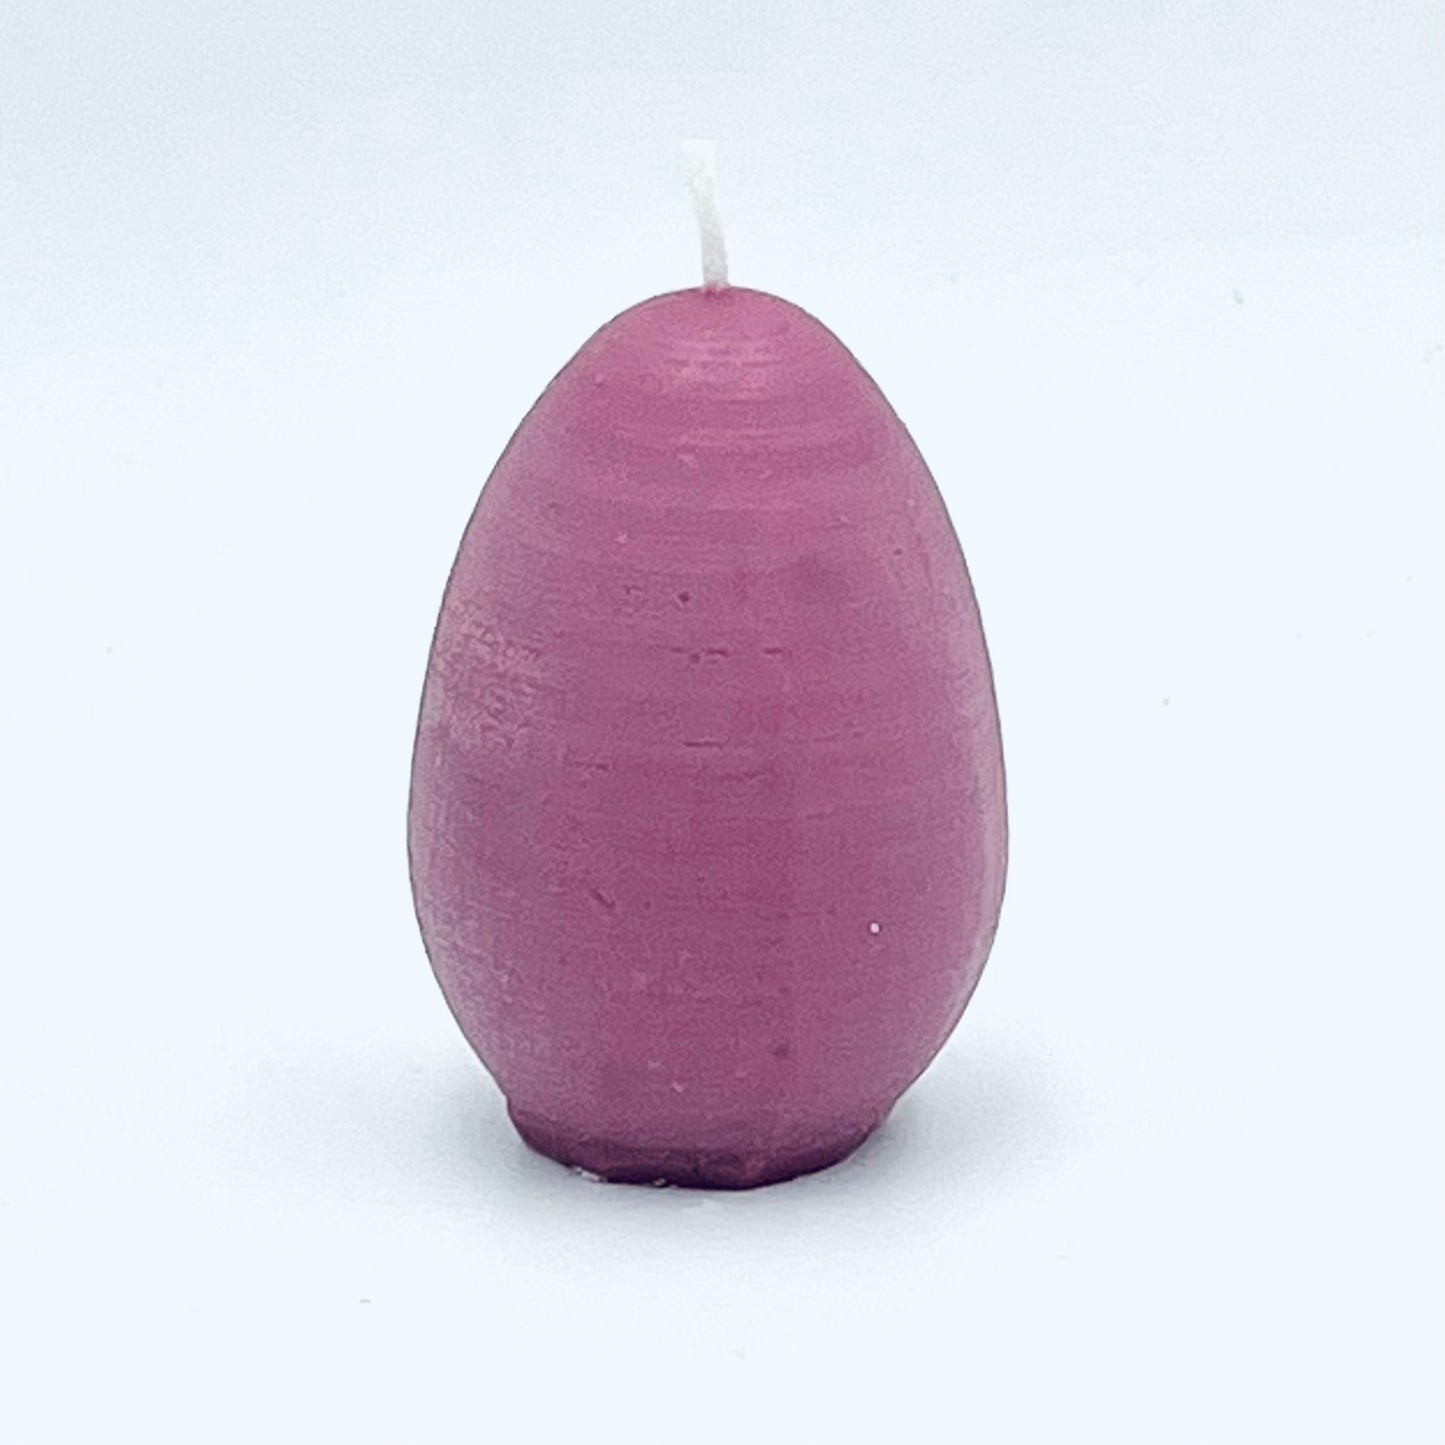 Design candle Easter egg from soy wax, old pink